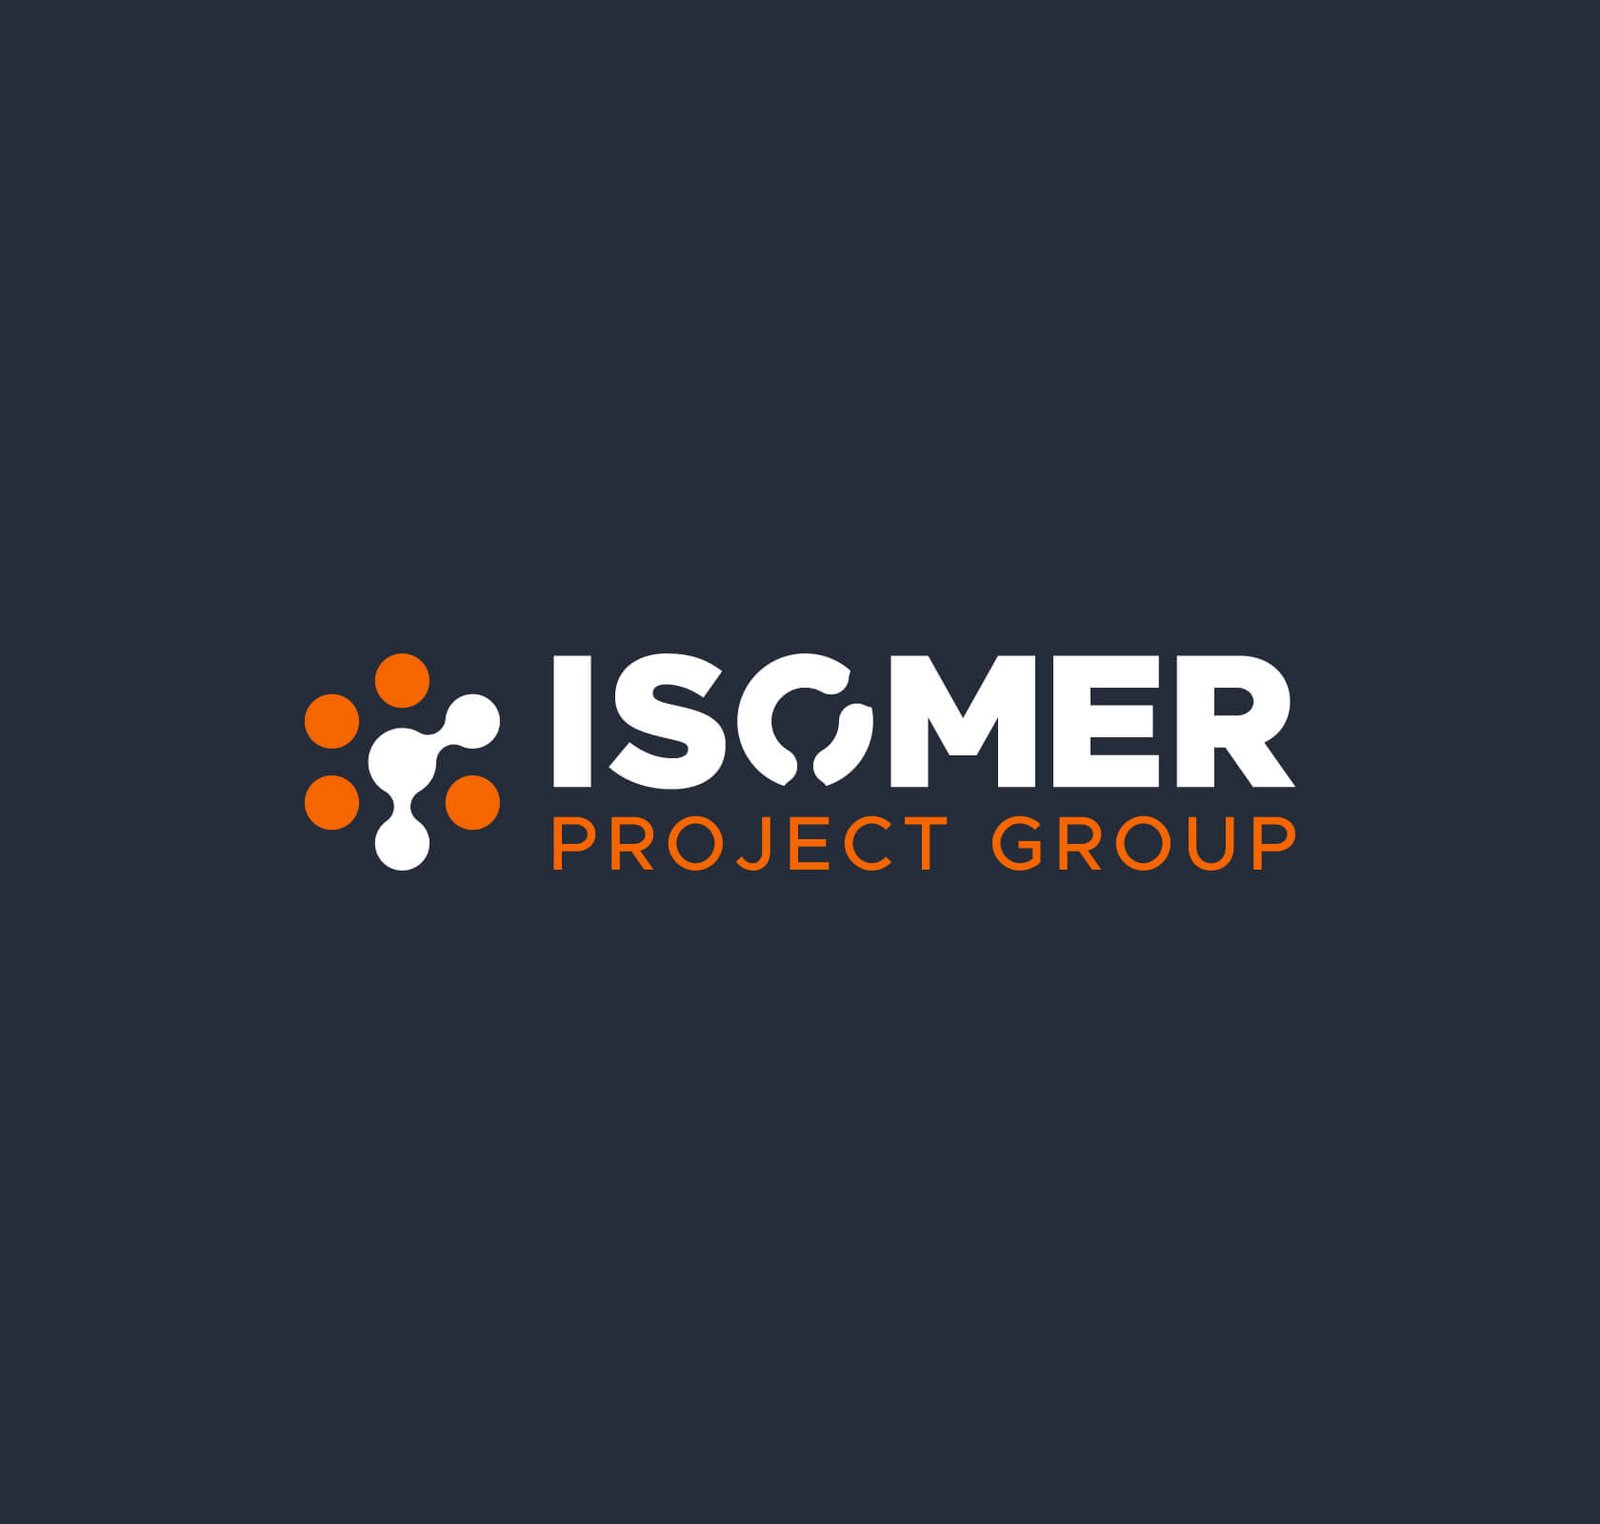 Isomer Project Group